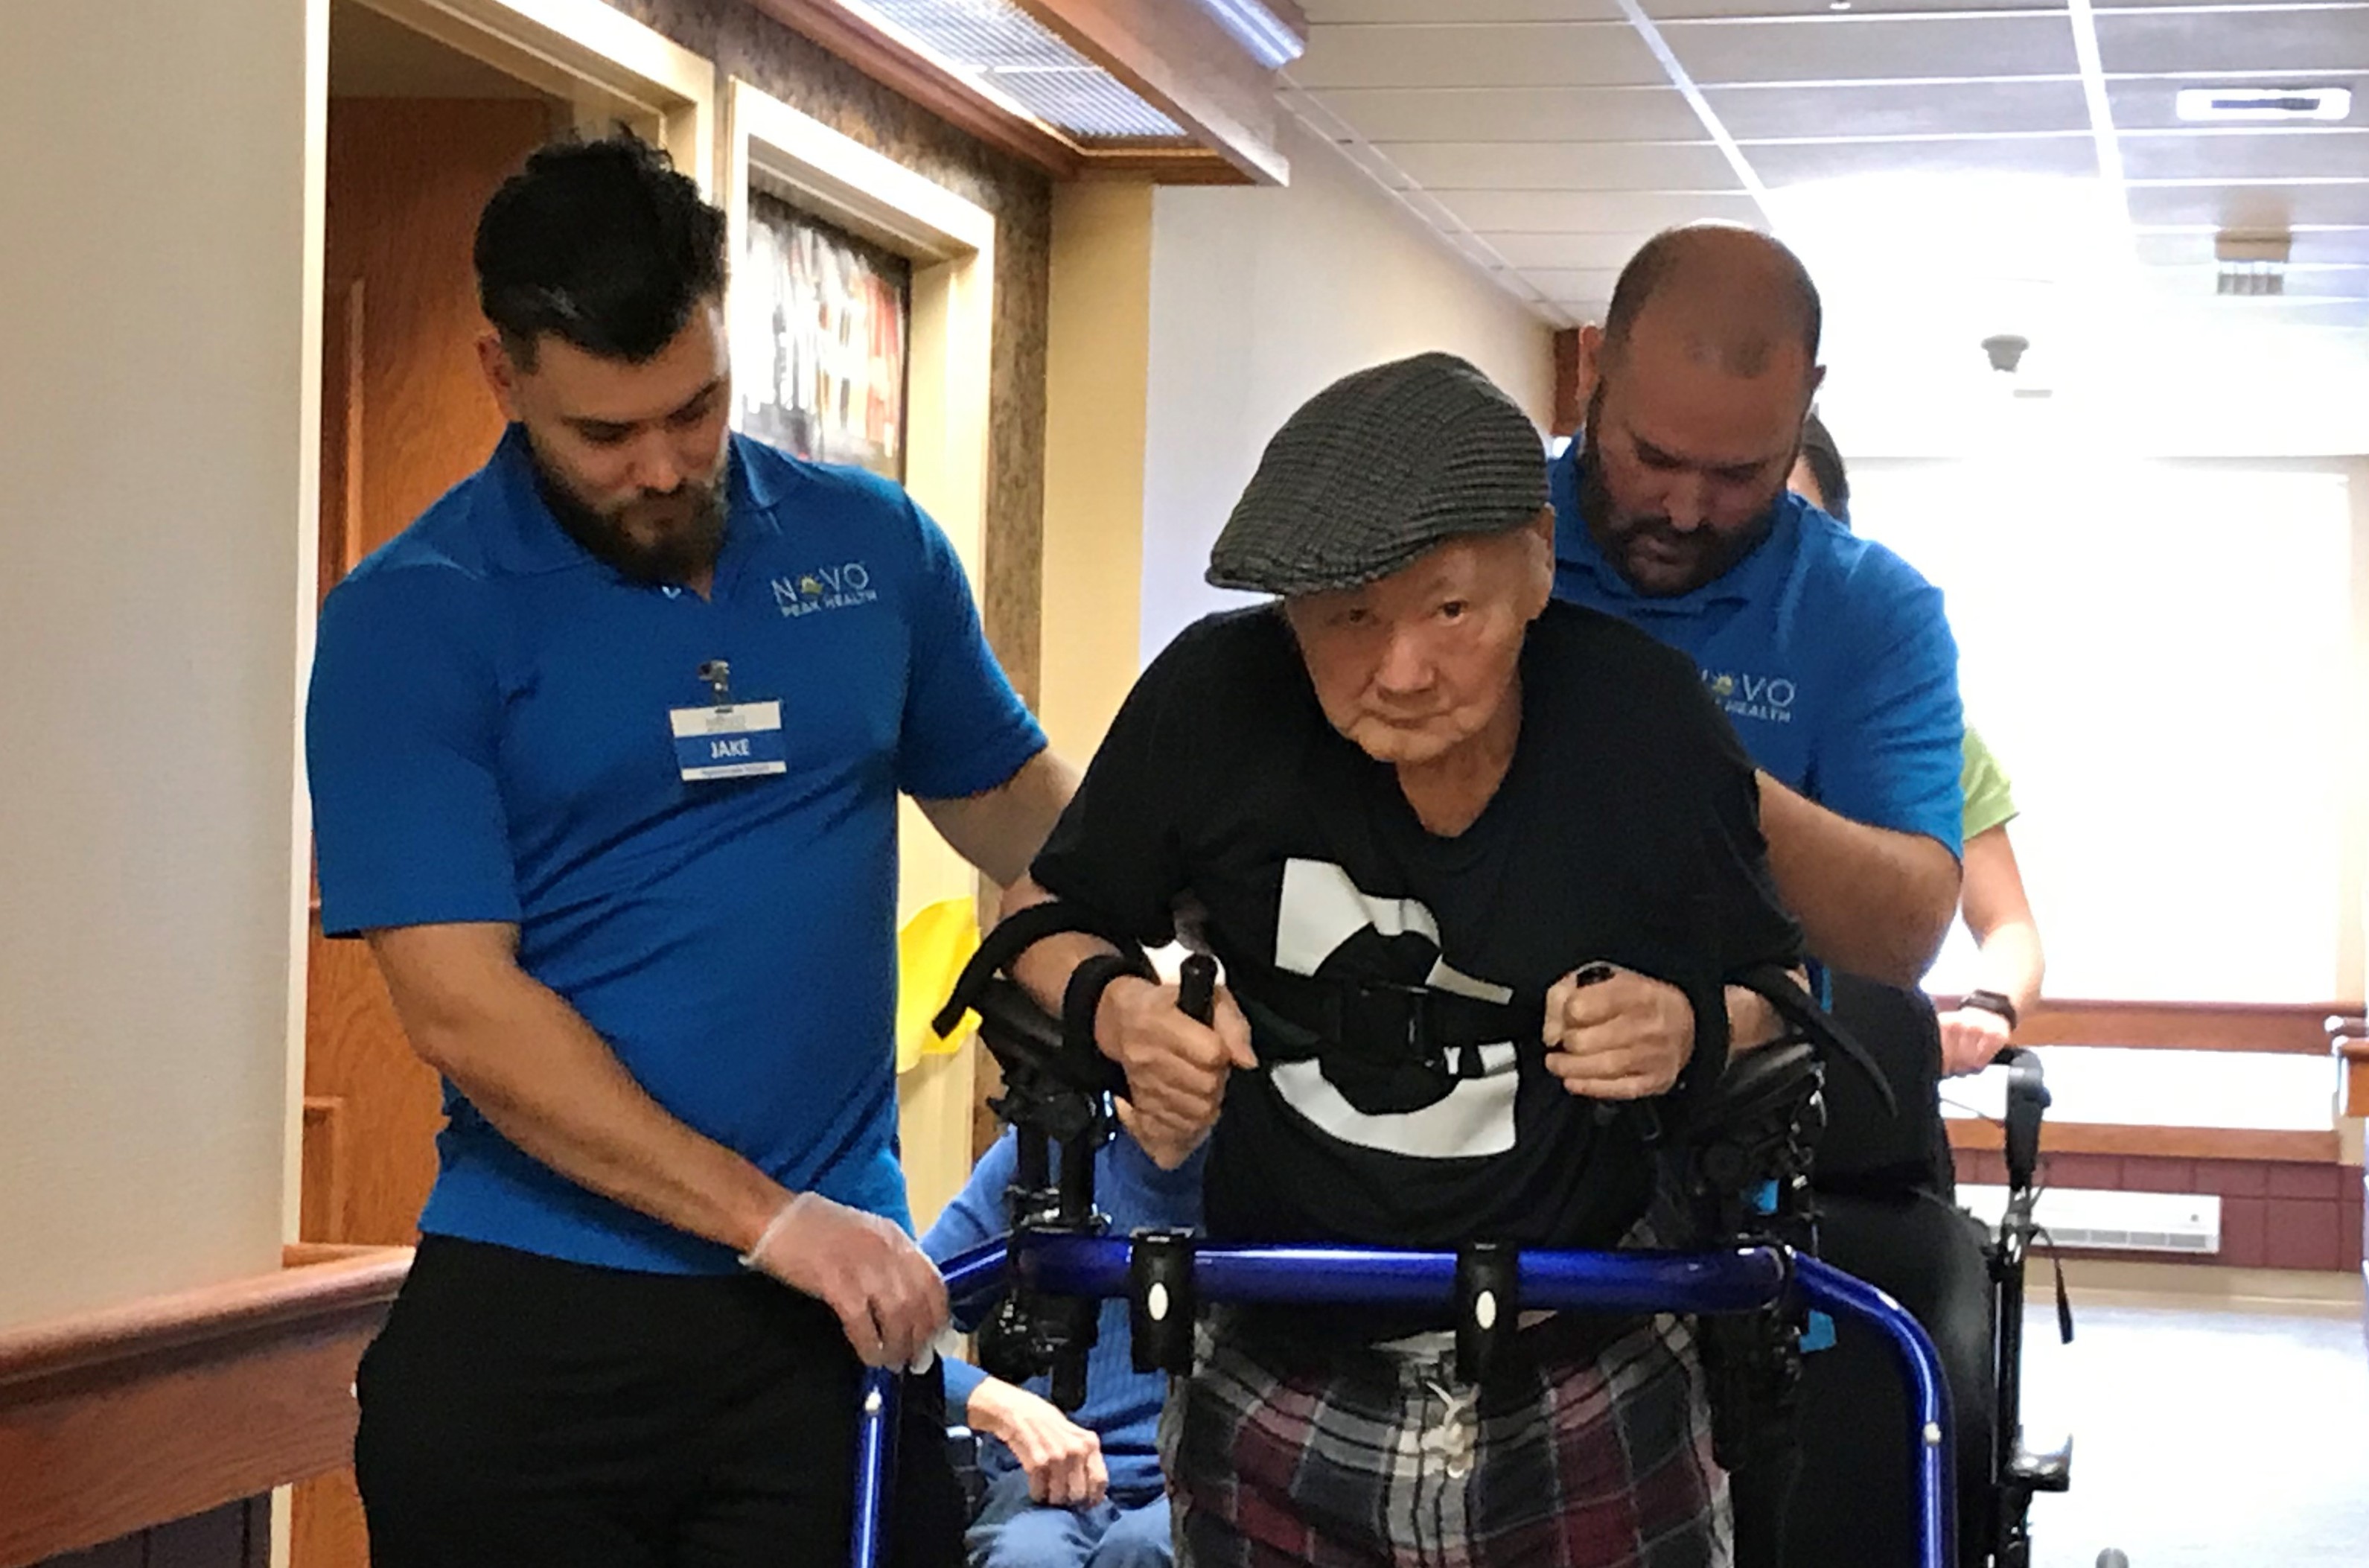 Physiotherapy assistants Jake and Steve work with Mr. Tran during his regular exercise efforts in The Village at St. Clair. 